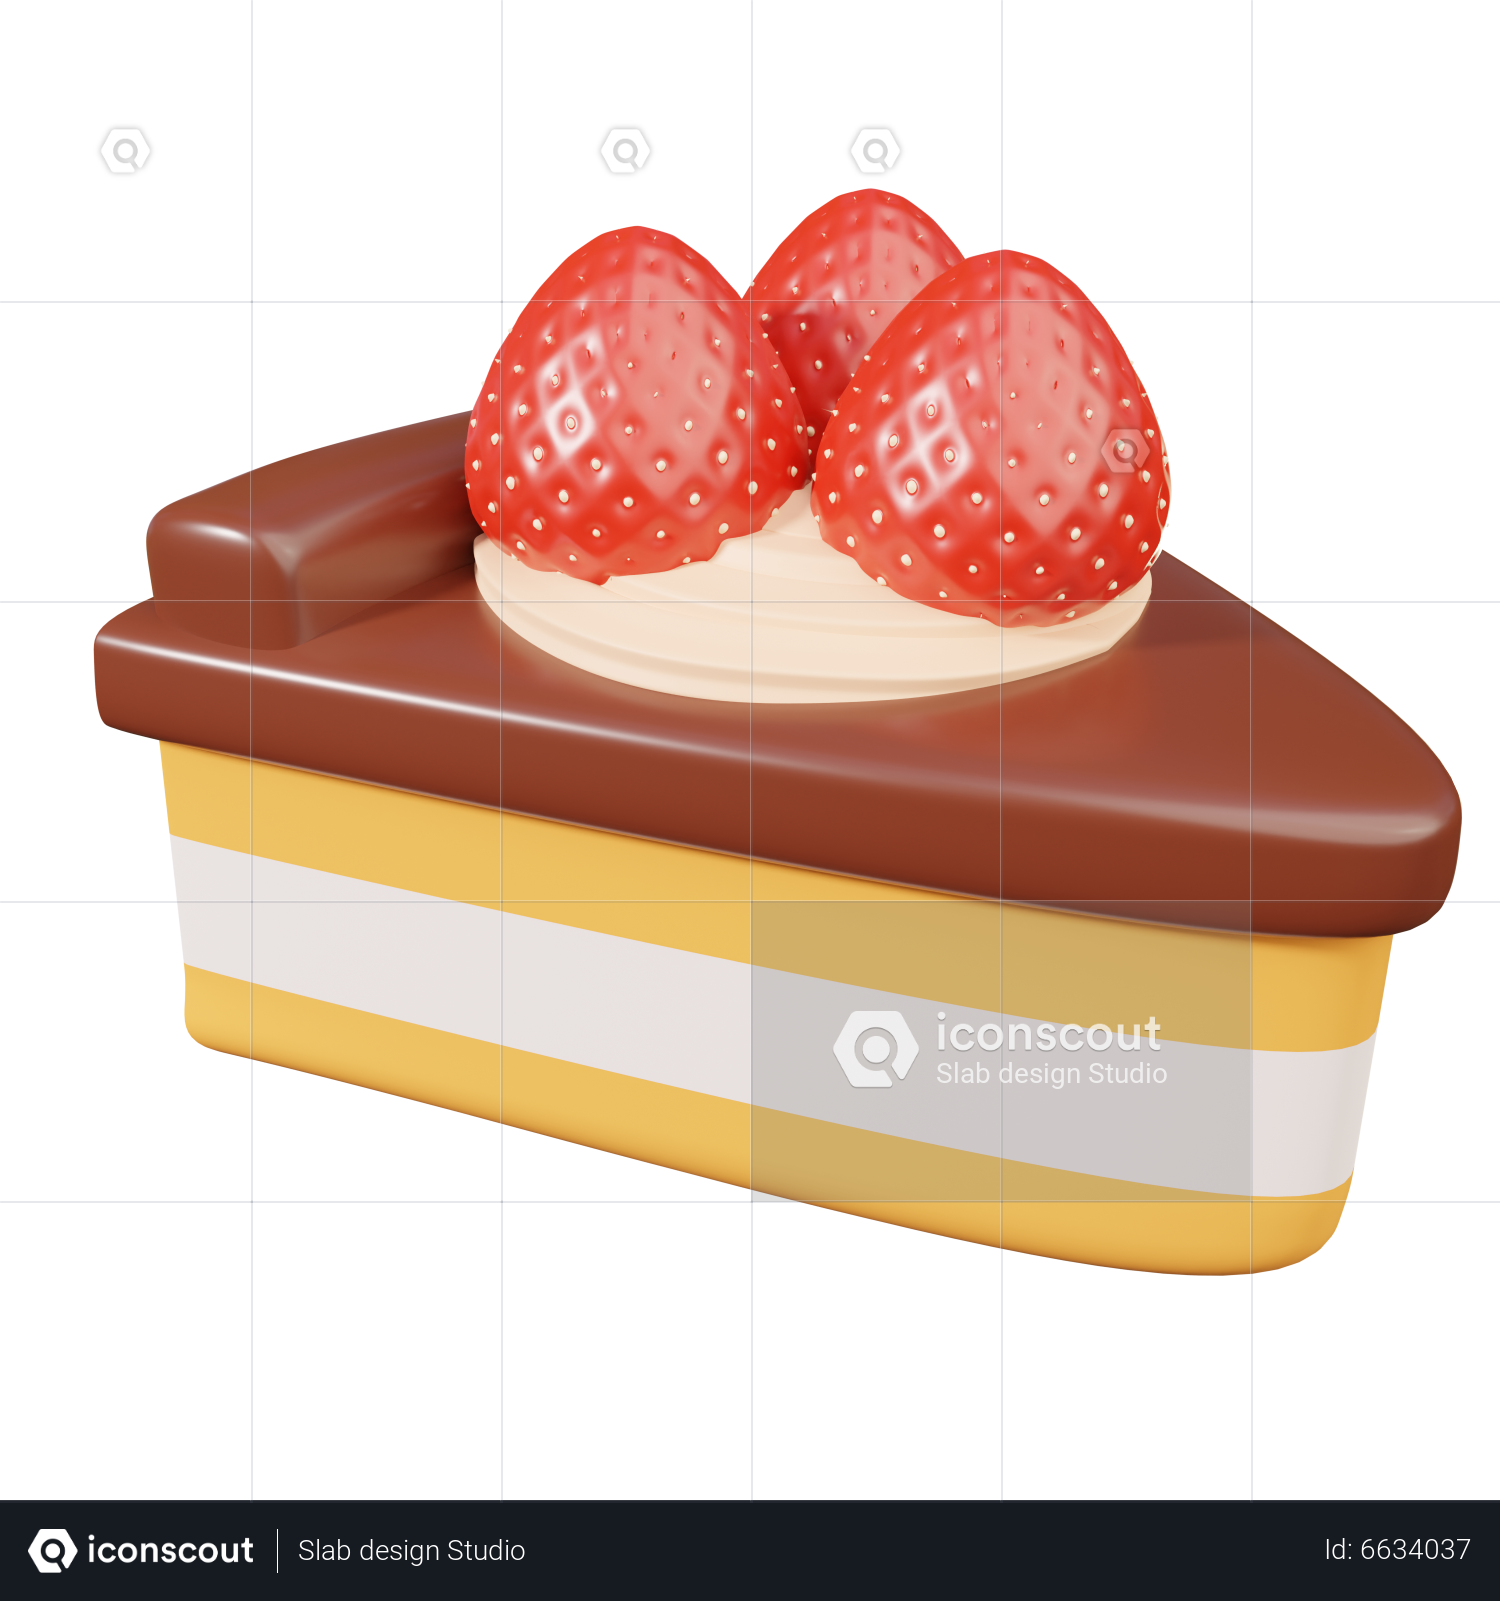 Premium Vector | Cute strawberry cake slices. delicious cakes in hand drawn  style